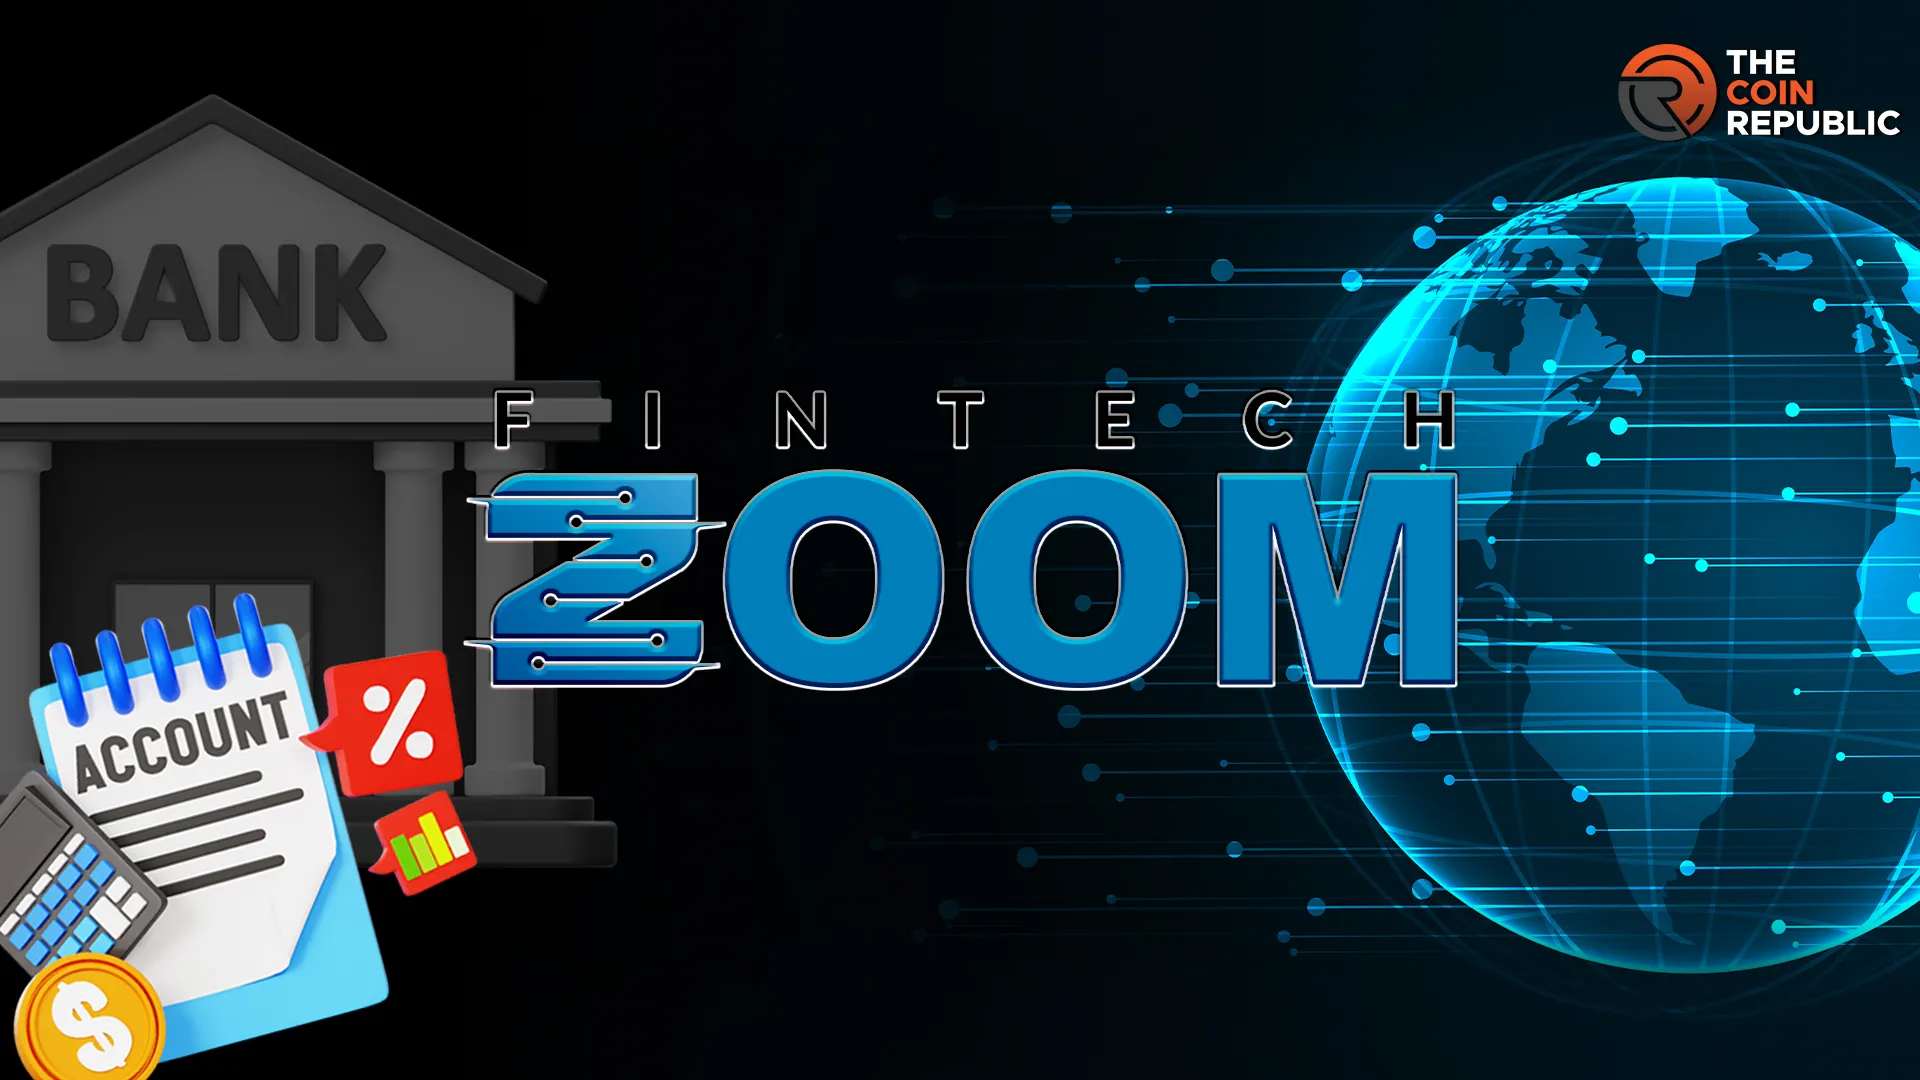 What Impact Will Fintechzoom Have On The Future Of Finance?